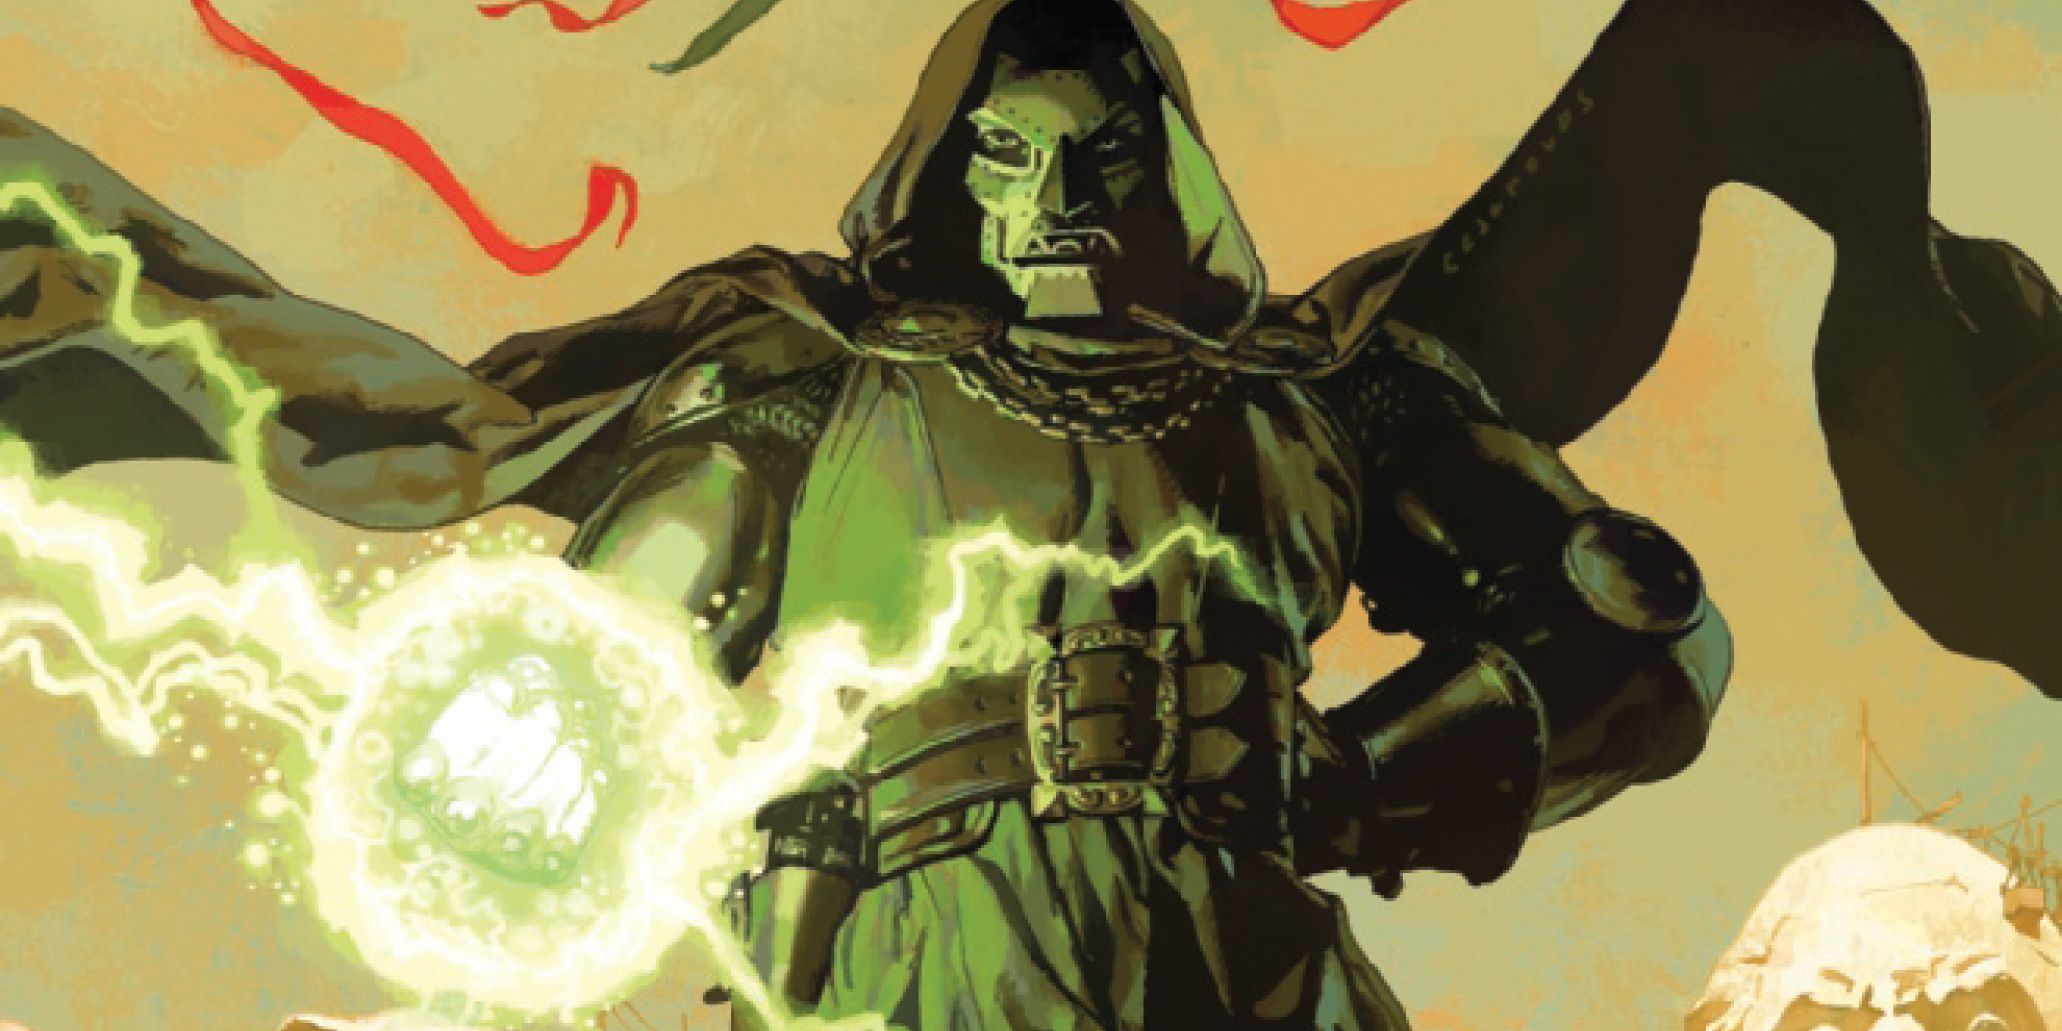 Doctor Doom projecting energy from his armored gauntlet in Marvel Comics